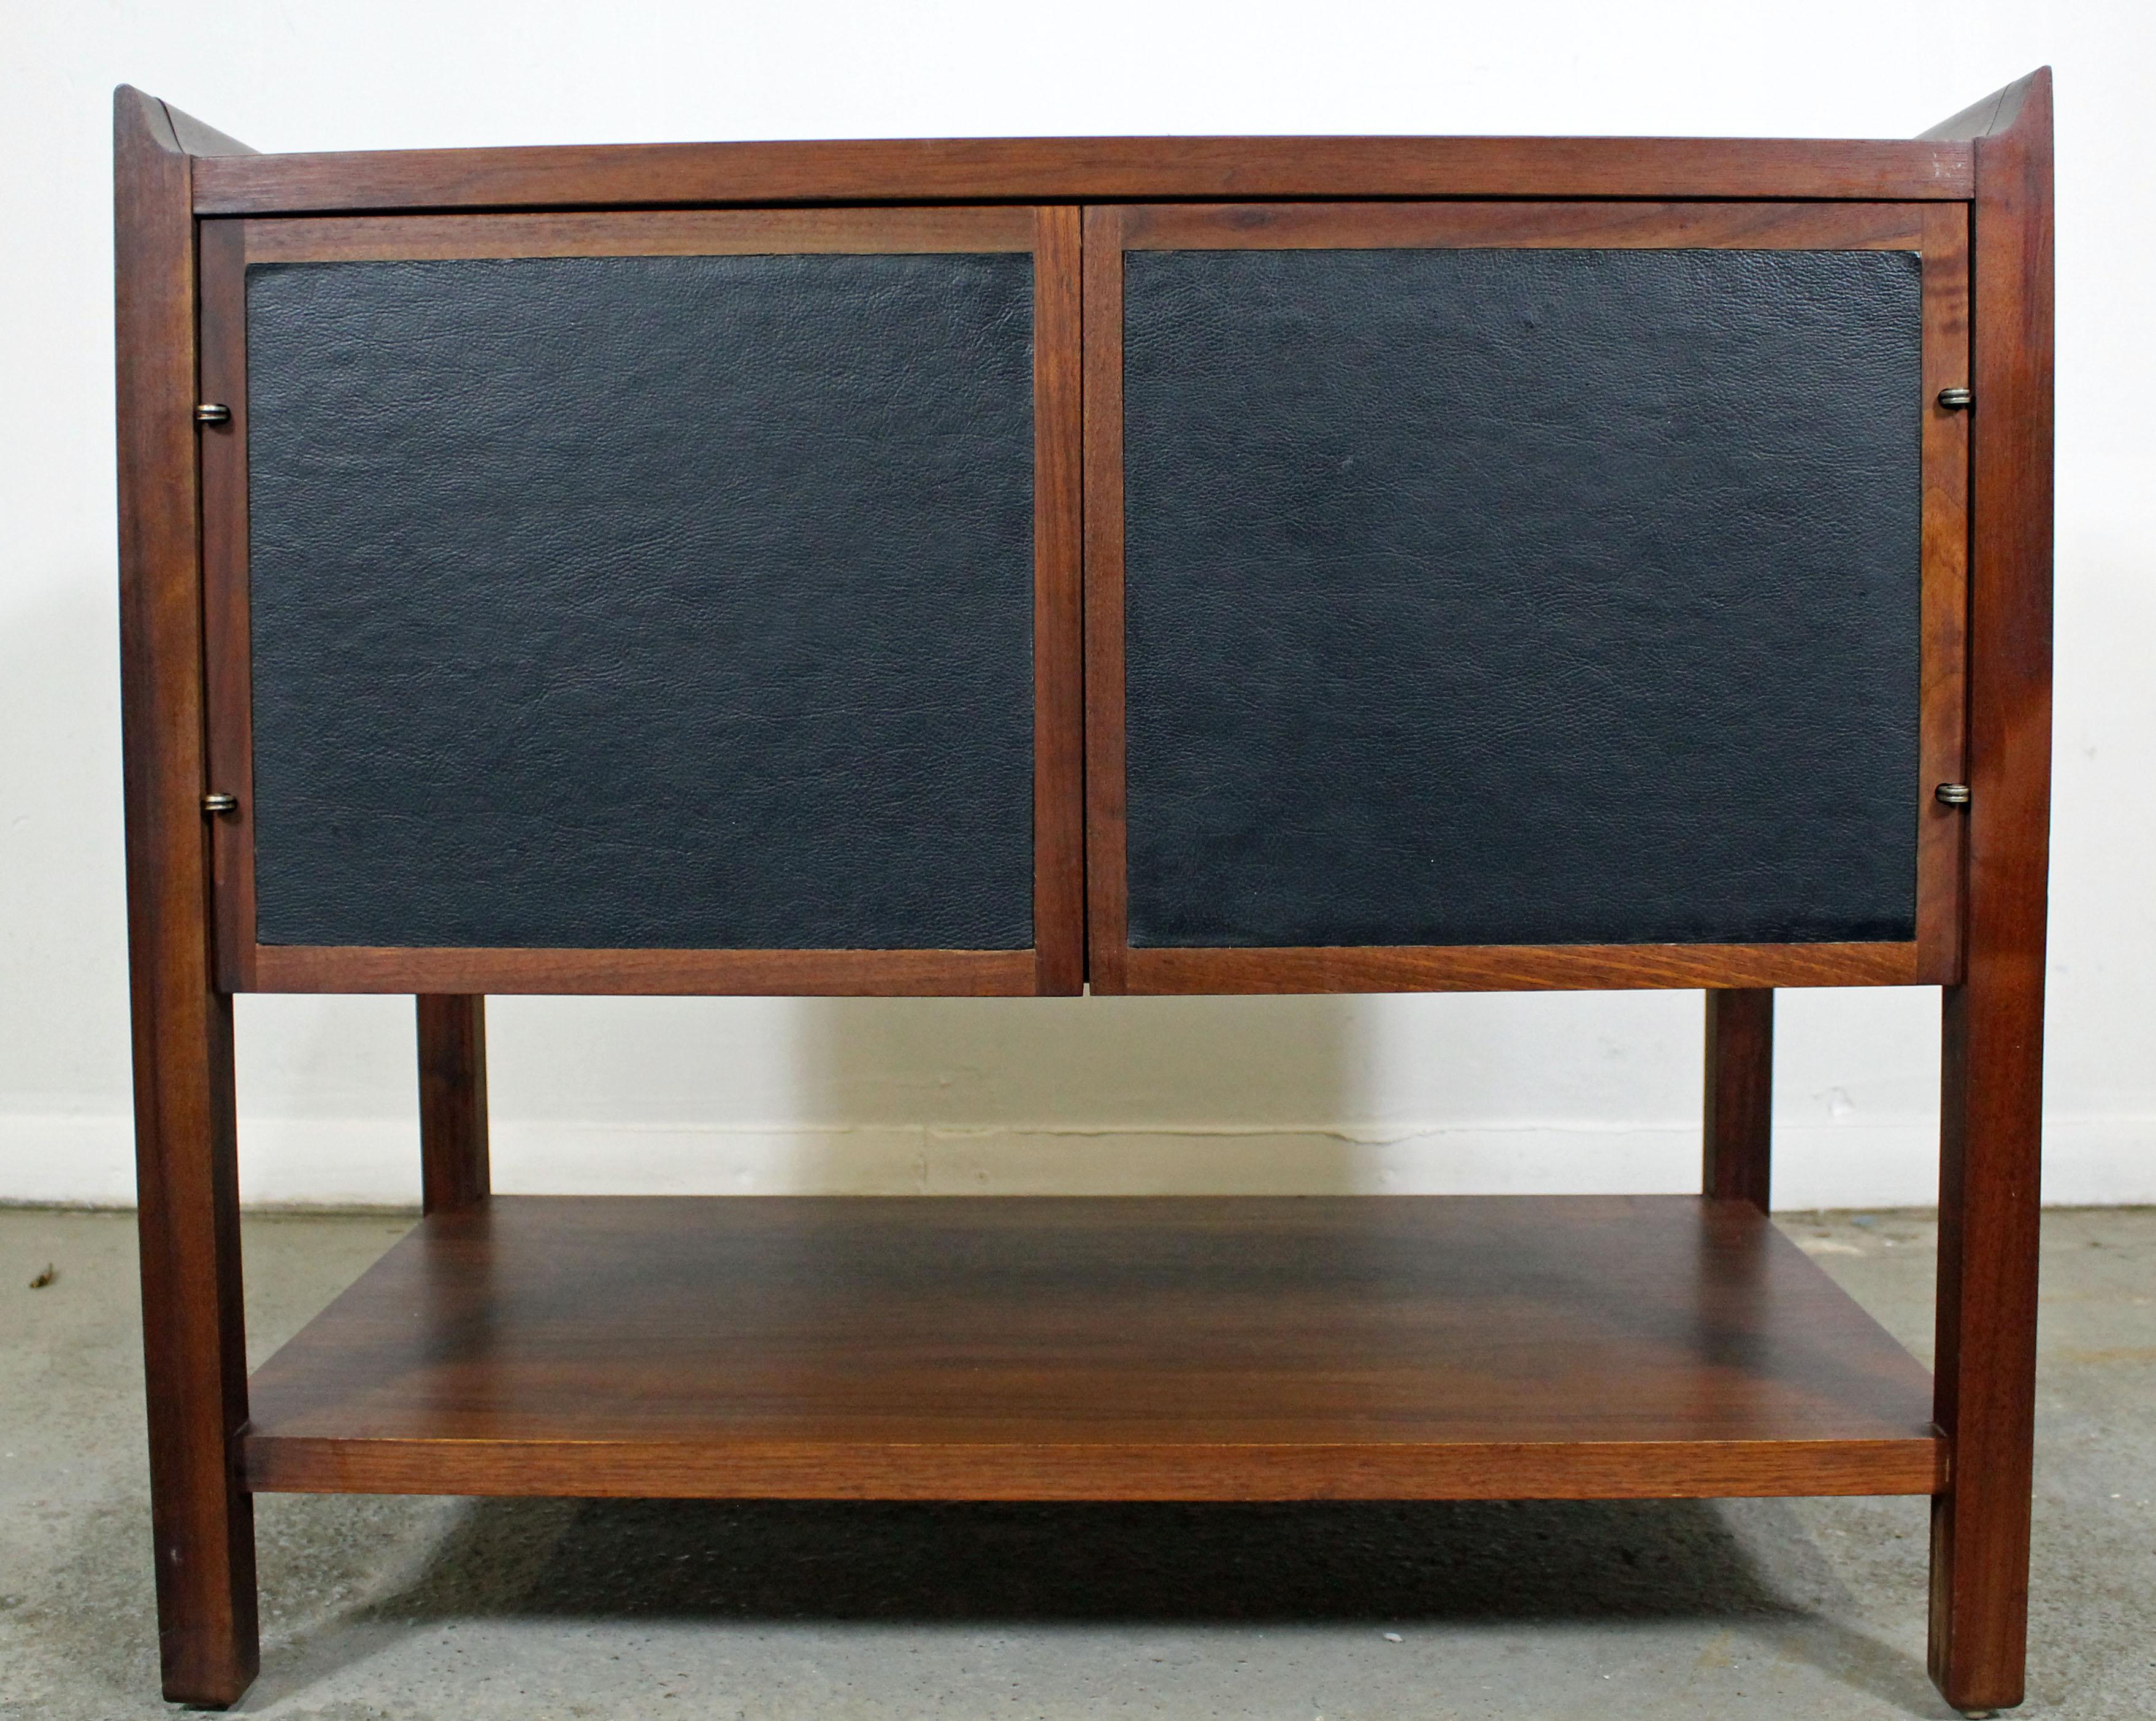 What a find! Offered is a Mid-Century Modern end table with flared edges, cabinet, and bottom shelf. It is in excellent condition for its age, shows minor wear (light surface scratch/wear -- see pictures). It is not signed.

Dimensions:
26